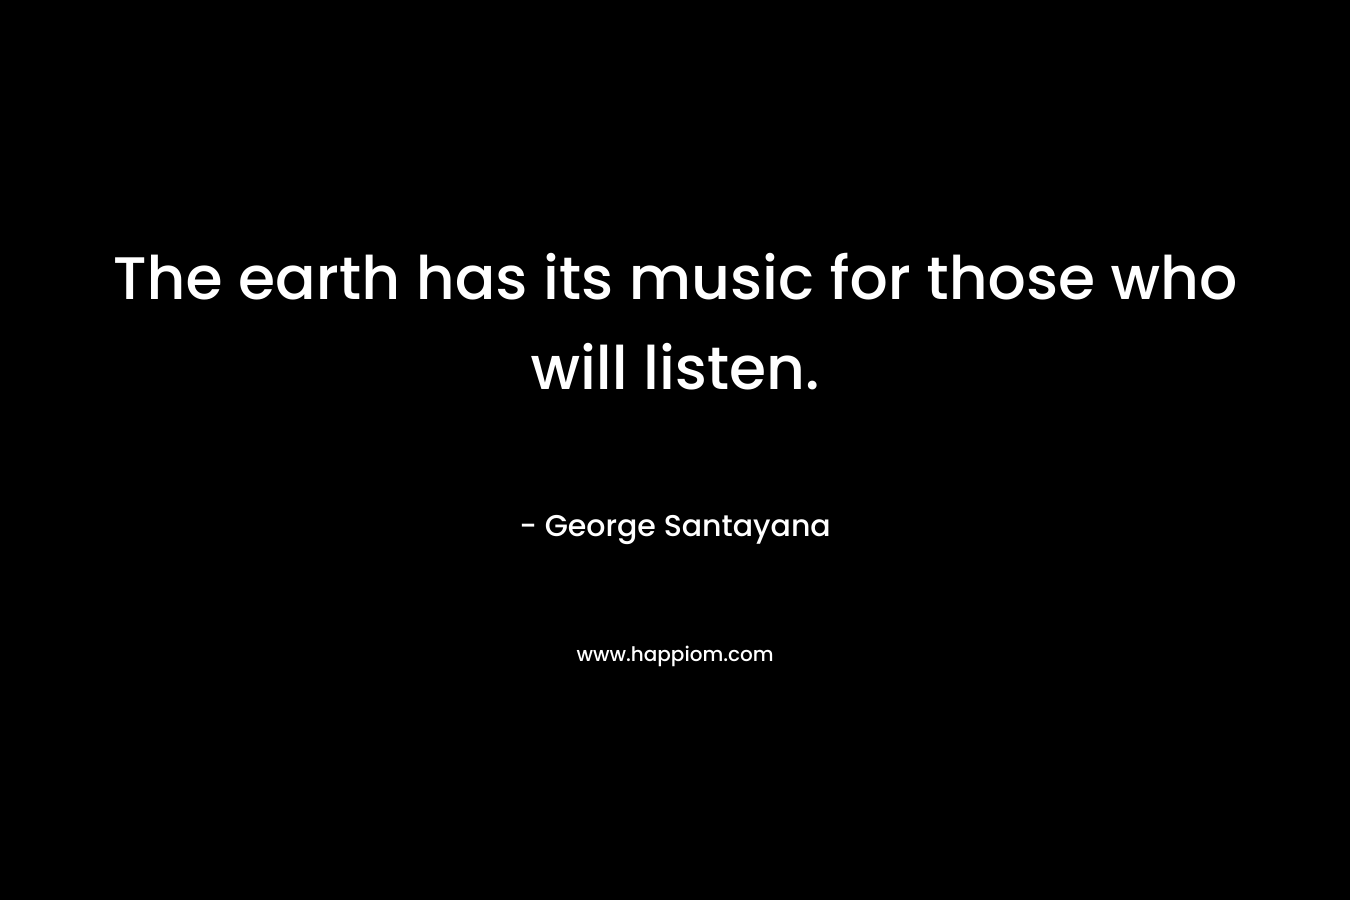 The earth has its music for those who will listen. – George Santayana